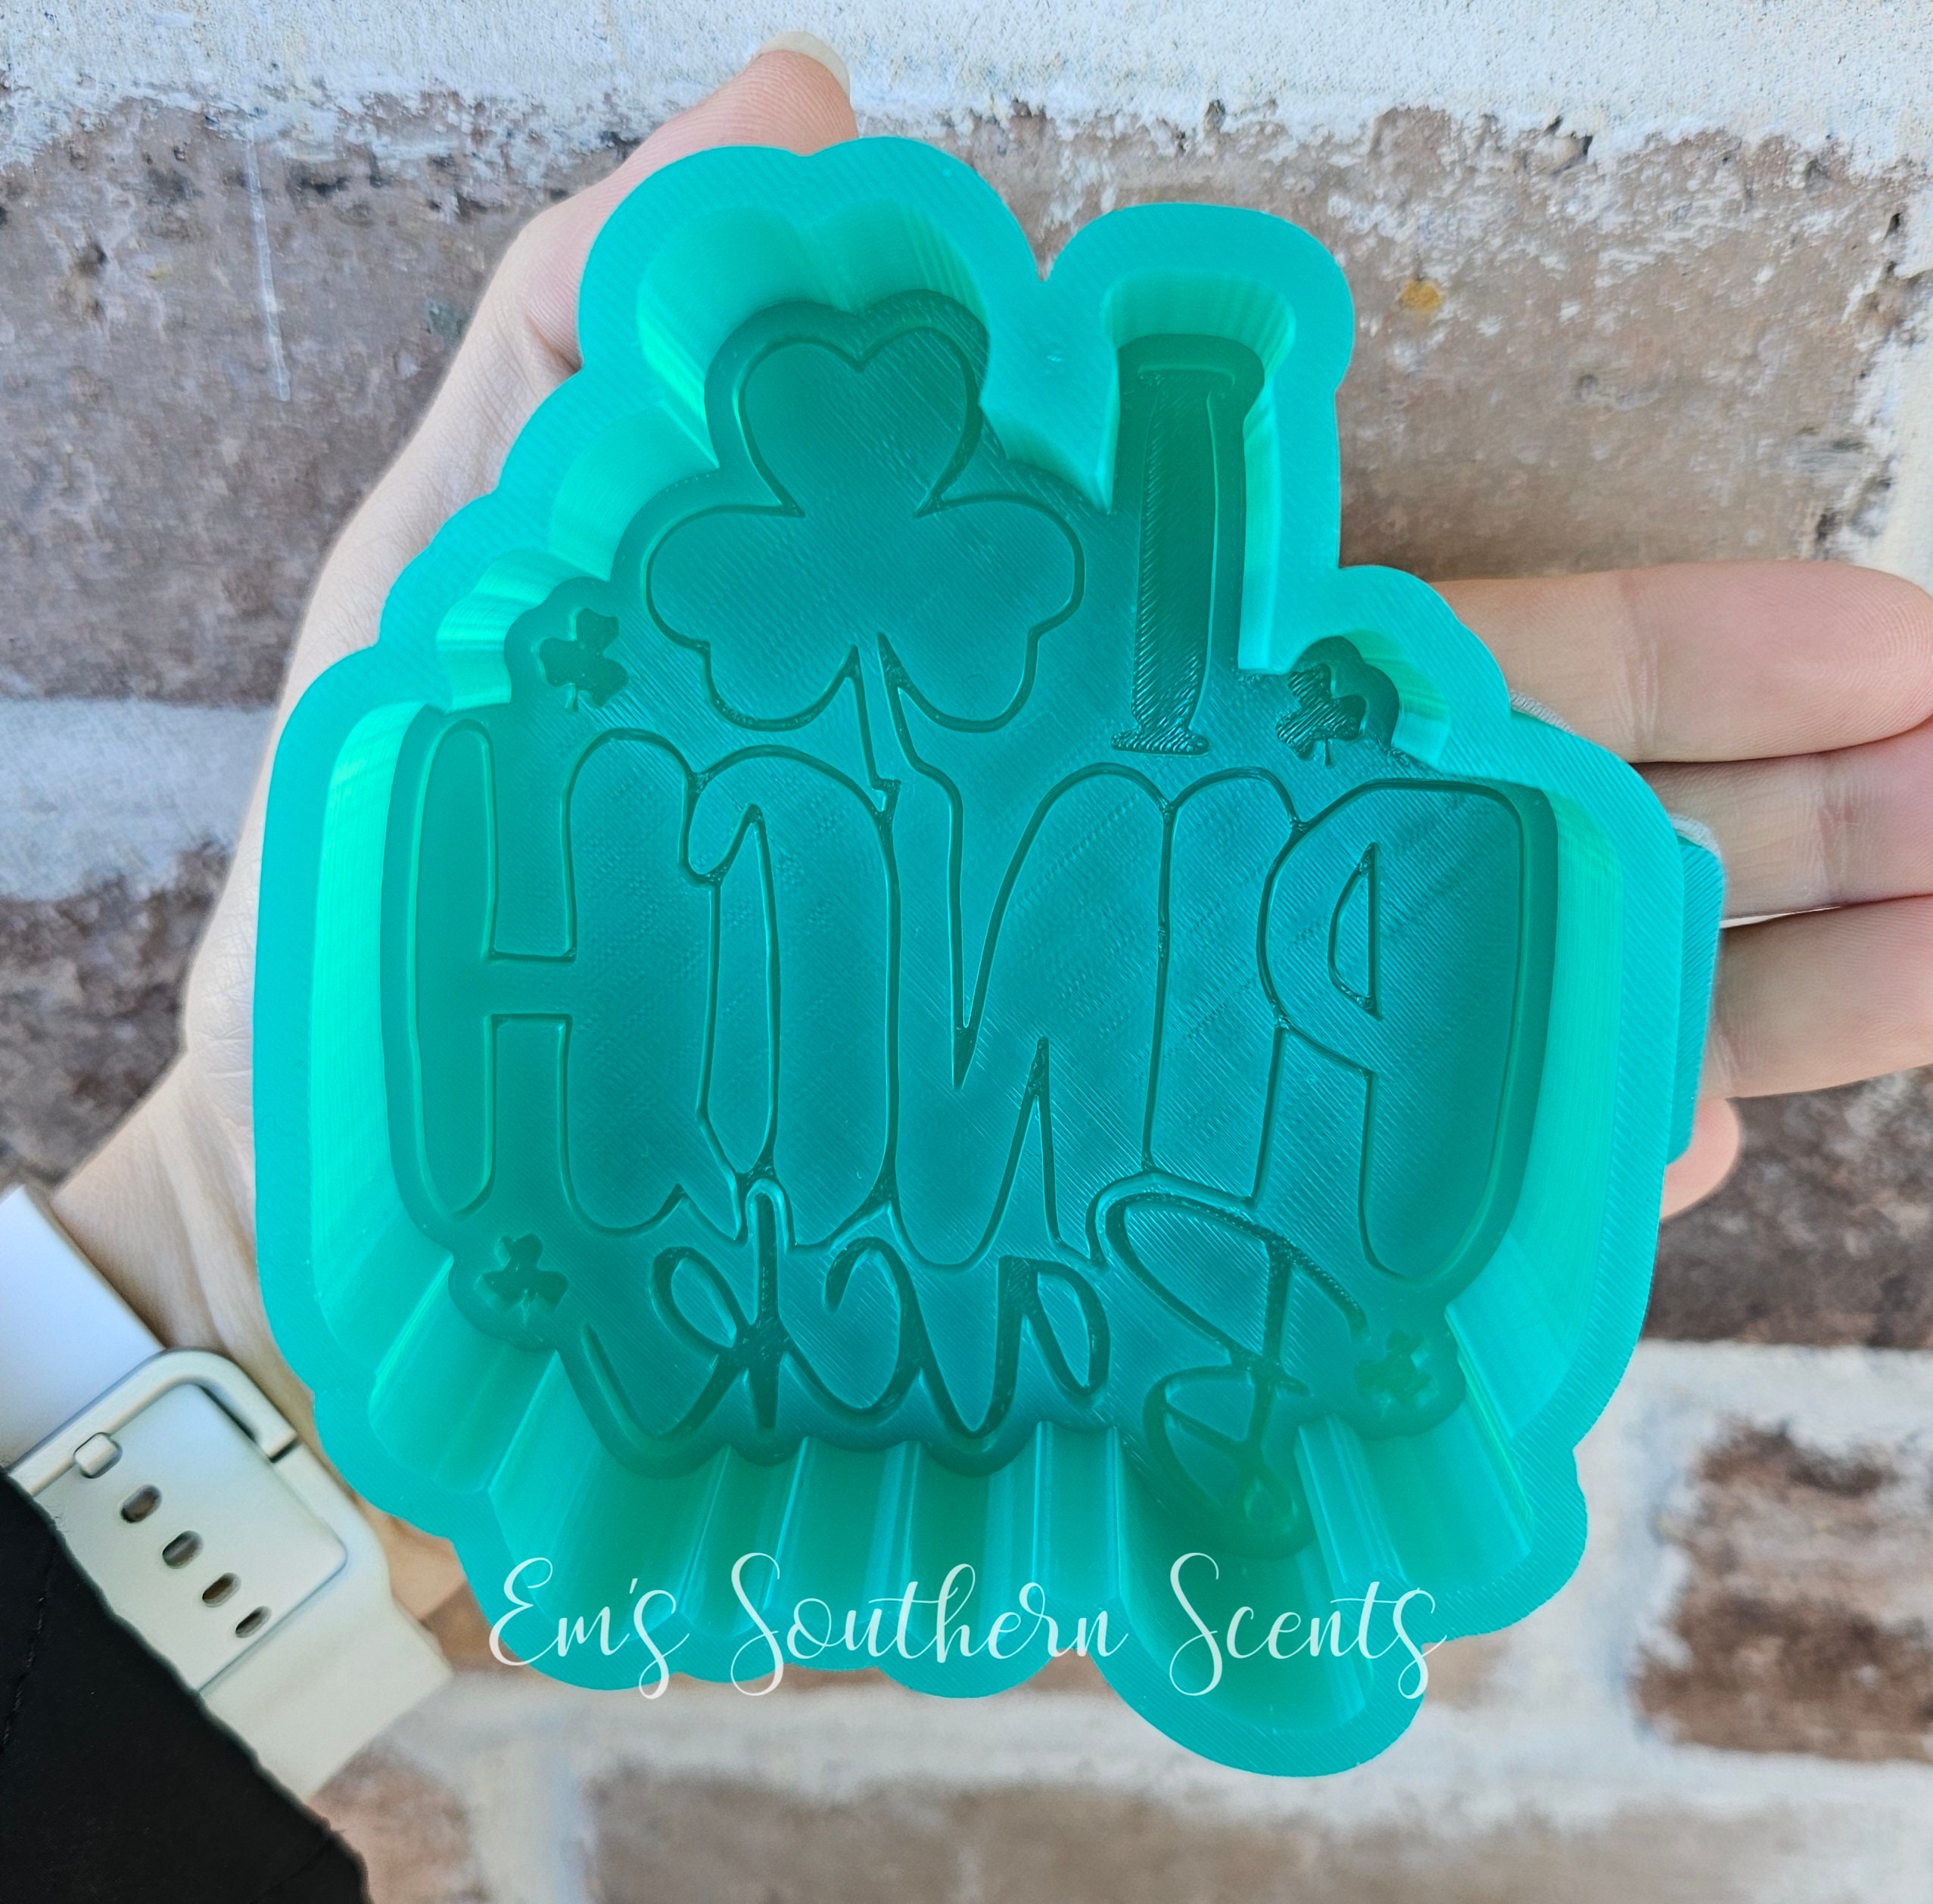 Boy Mom Cardstock Cutouts Southern Scents Fragrances